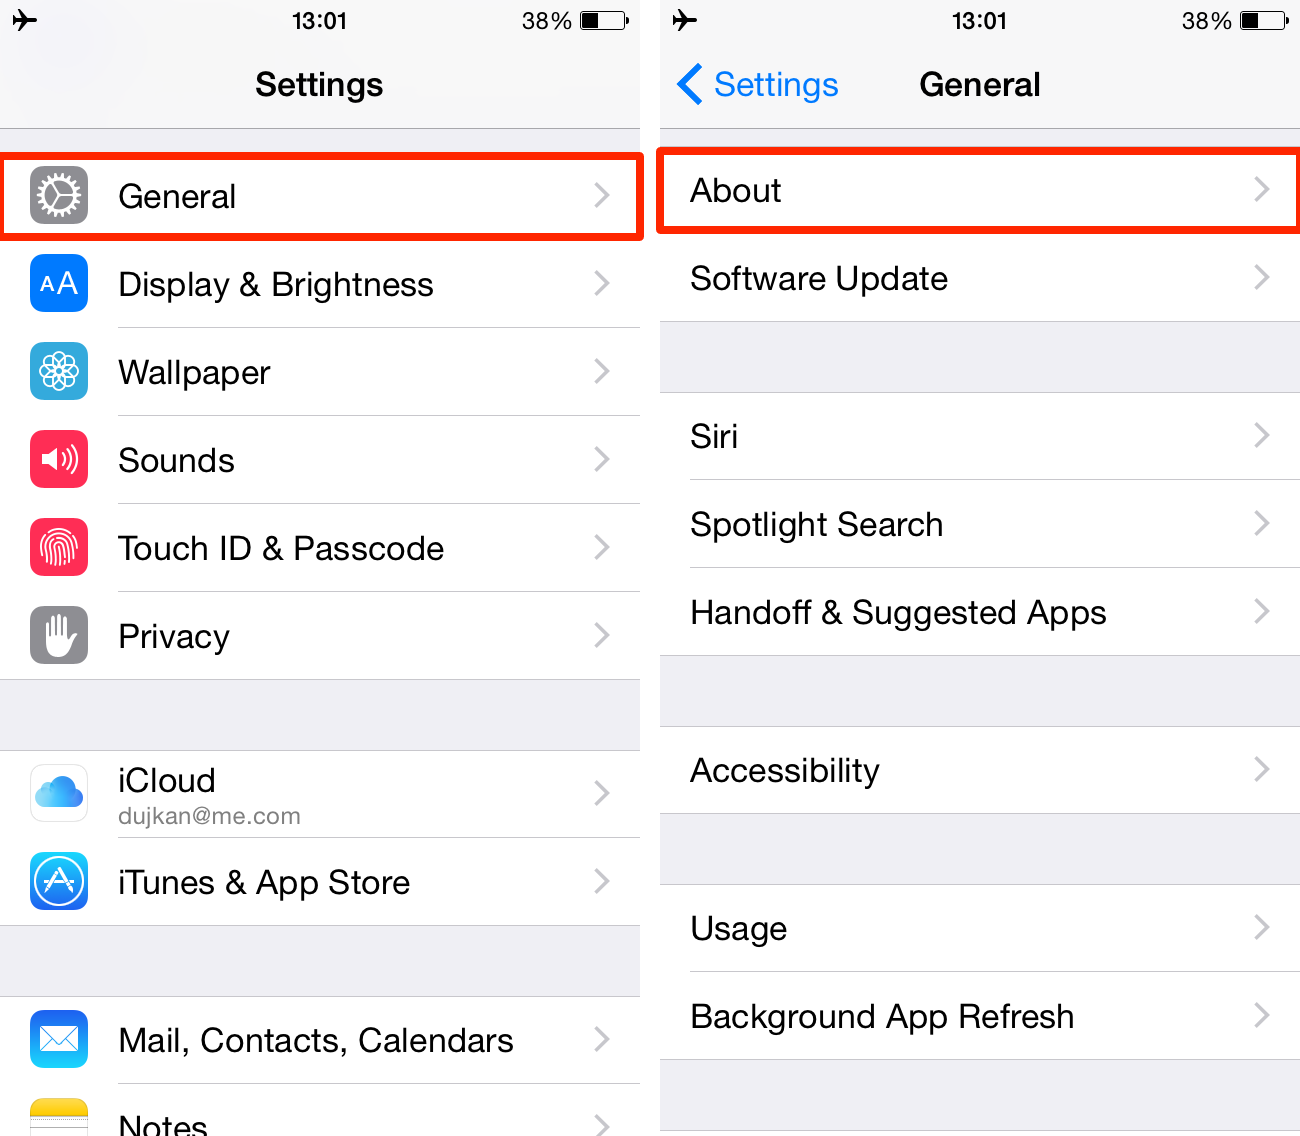 About section in iPhone settings